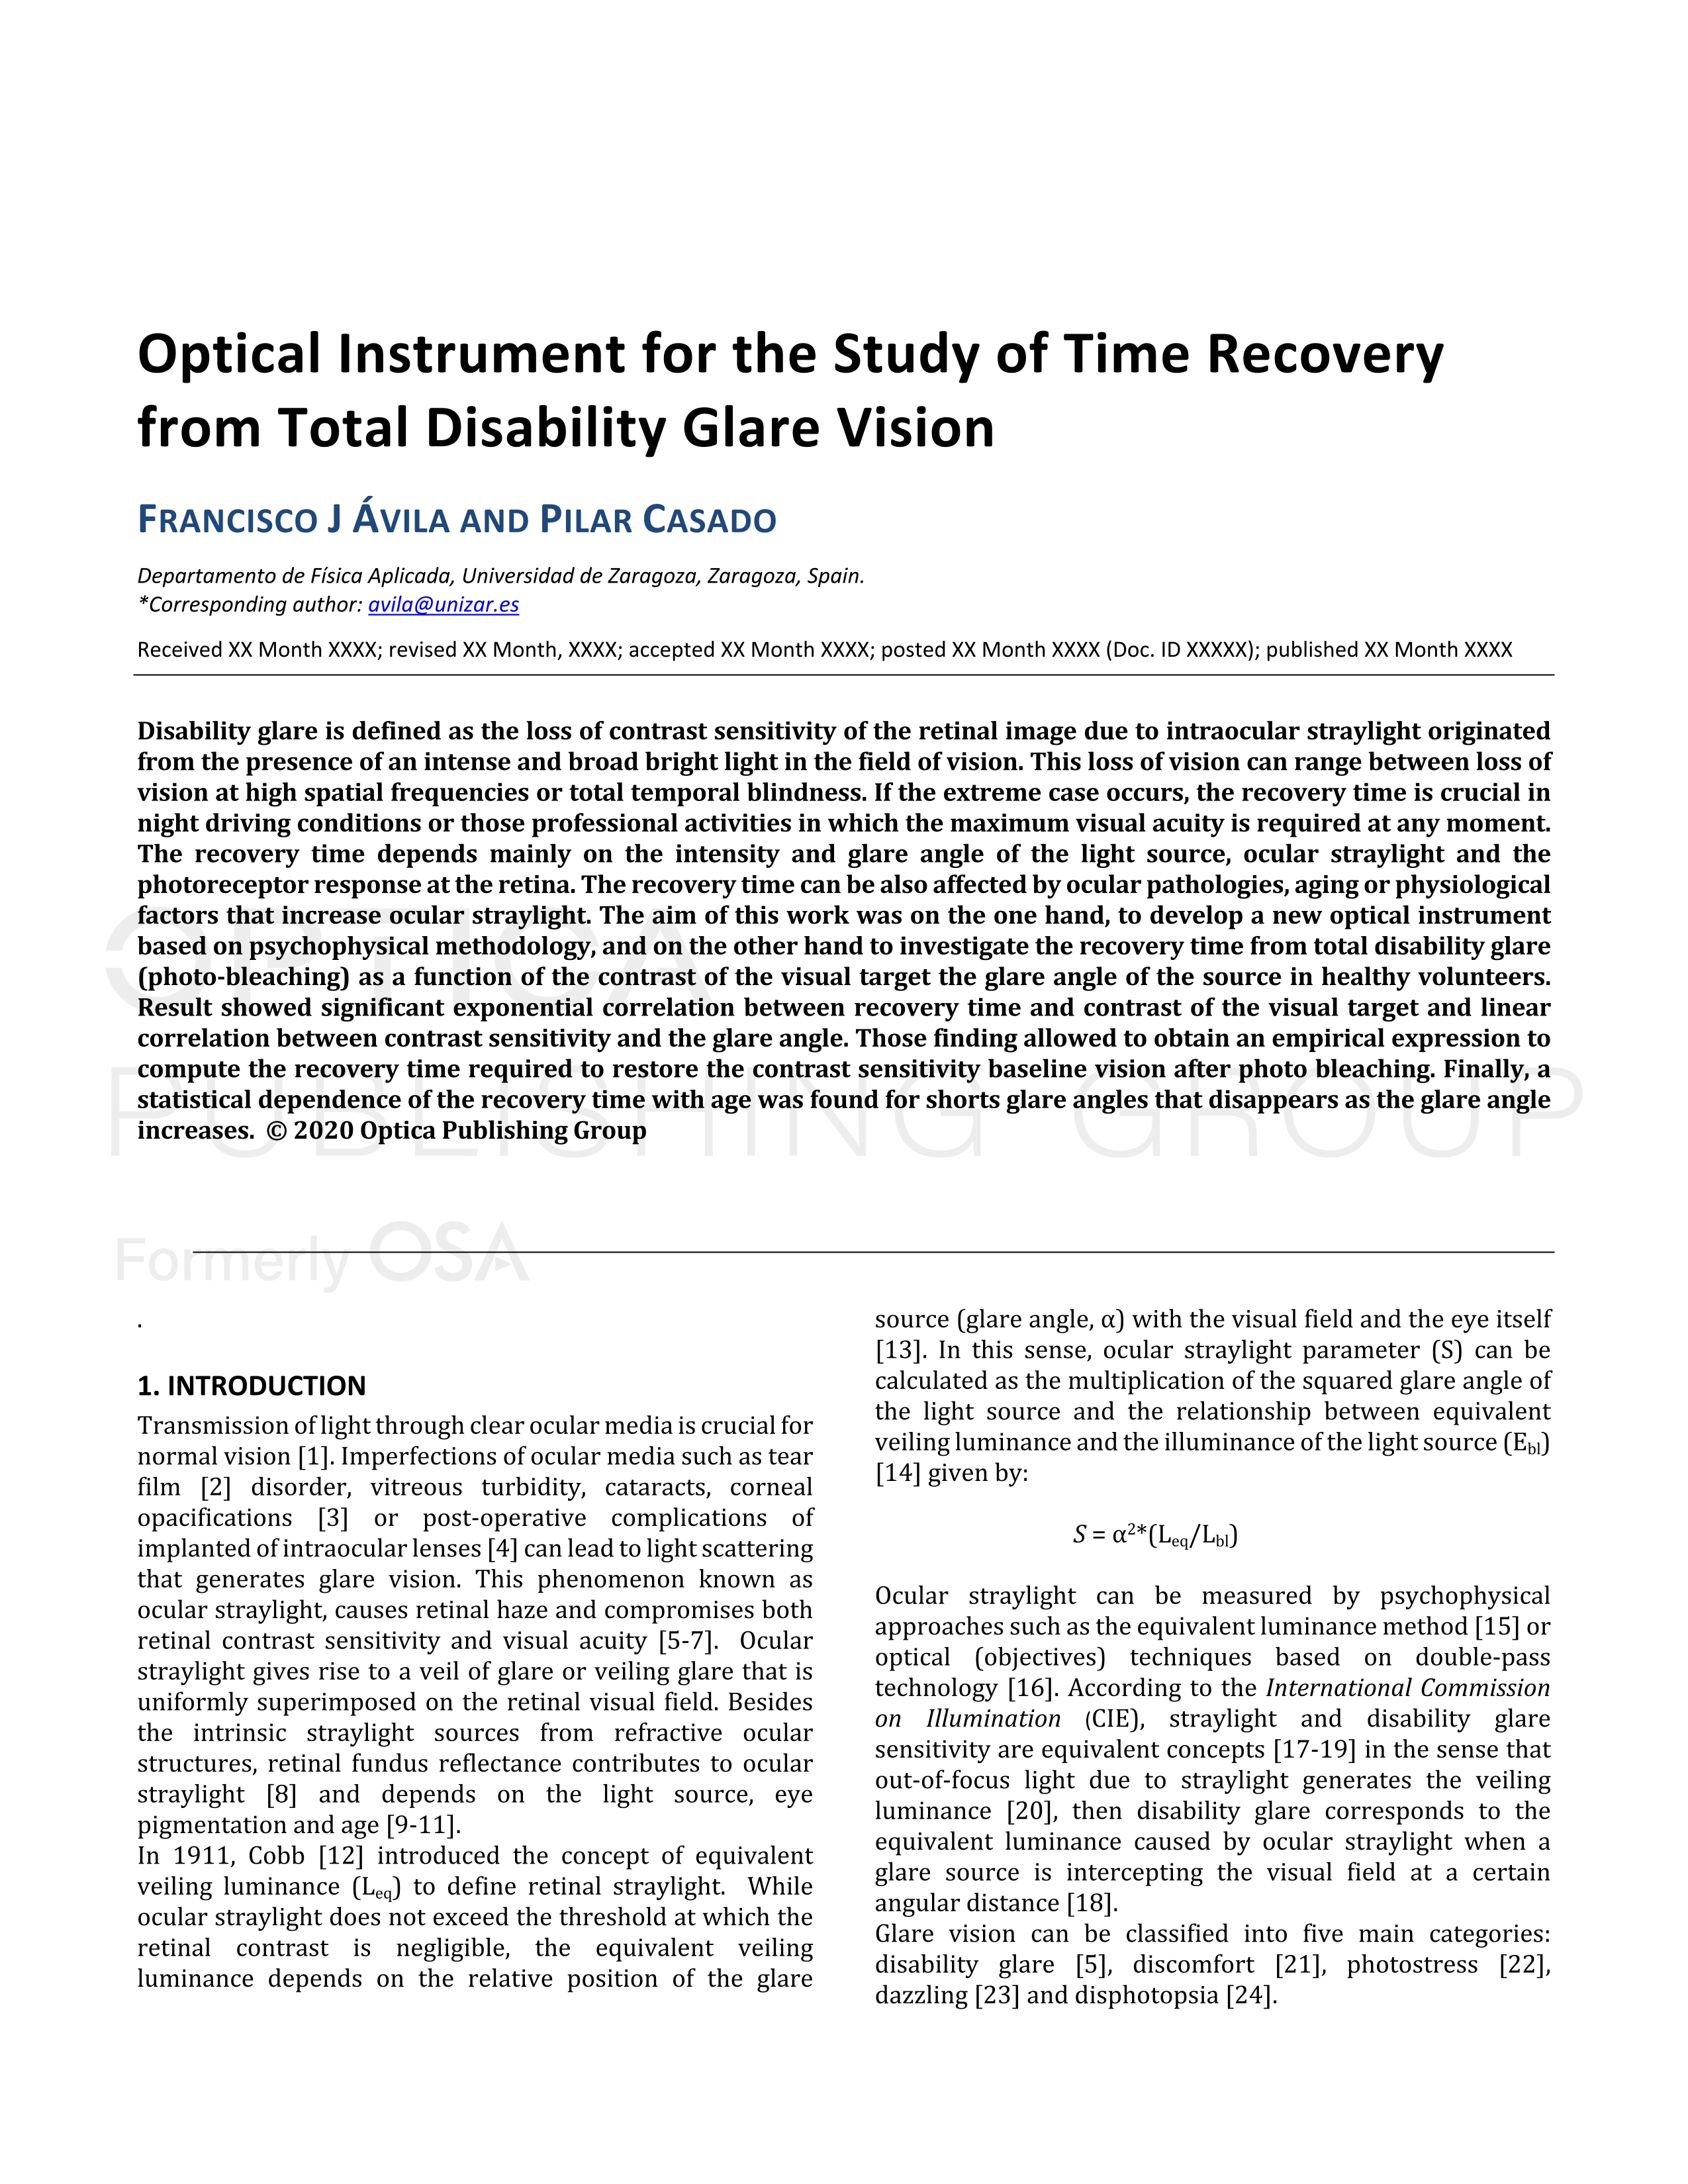 Optical instrument for the study of time recovery from total disability glare vision